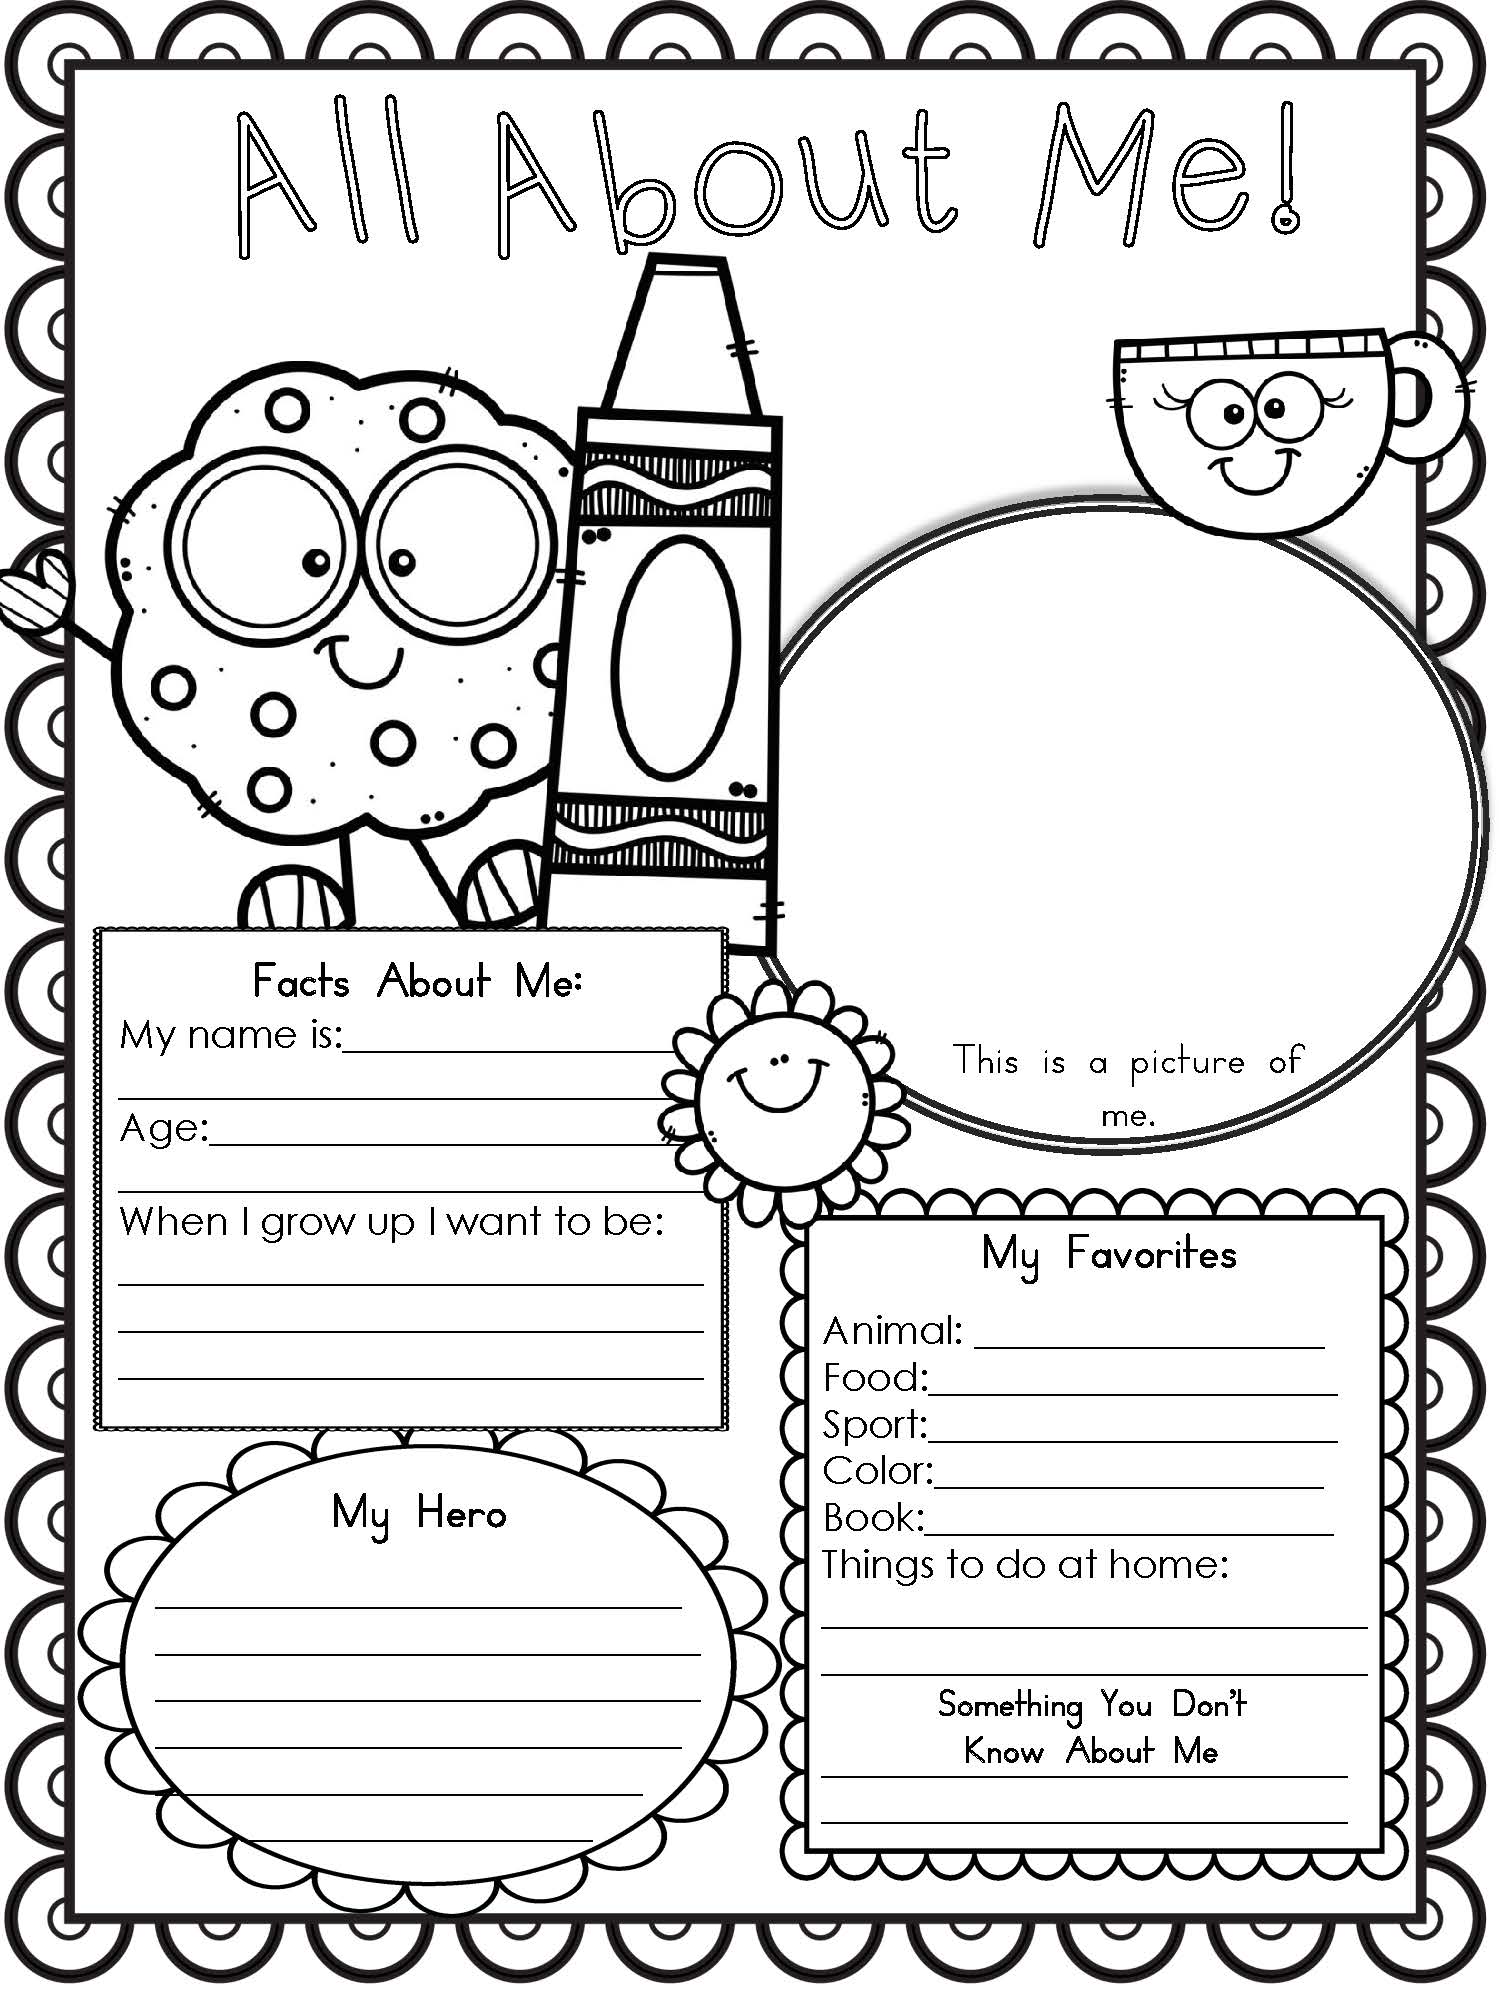 Free Printable All About Me Worksheet - Modern Homeschool Family